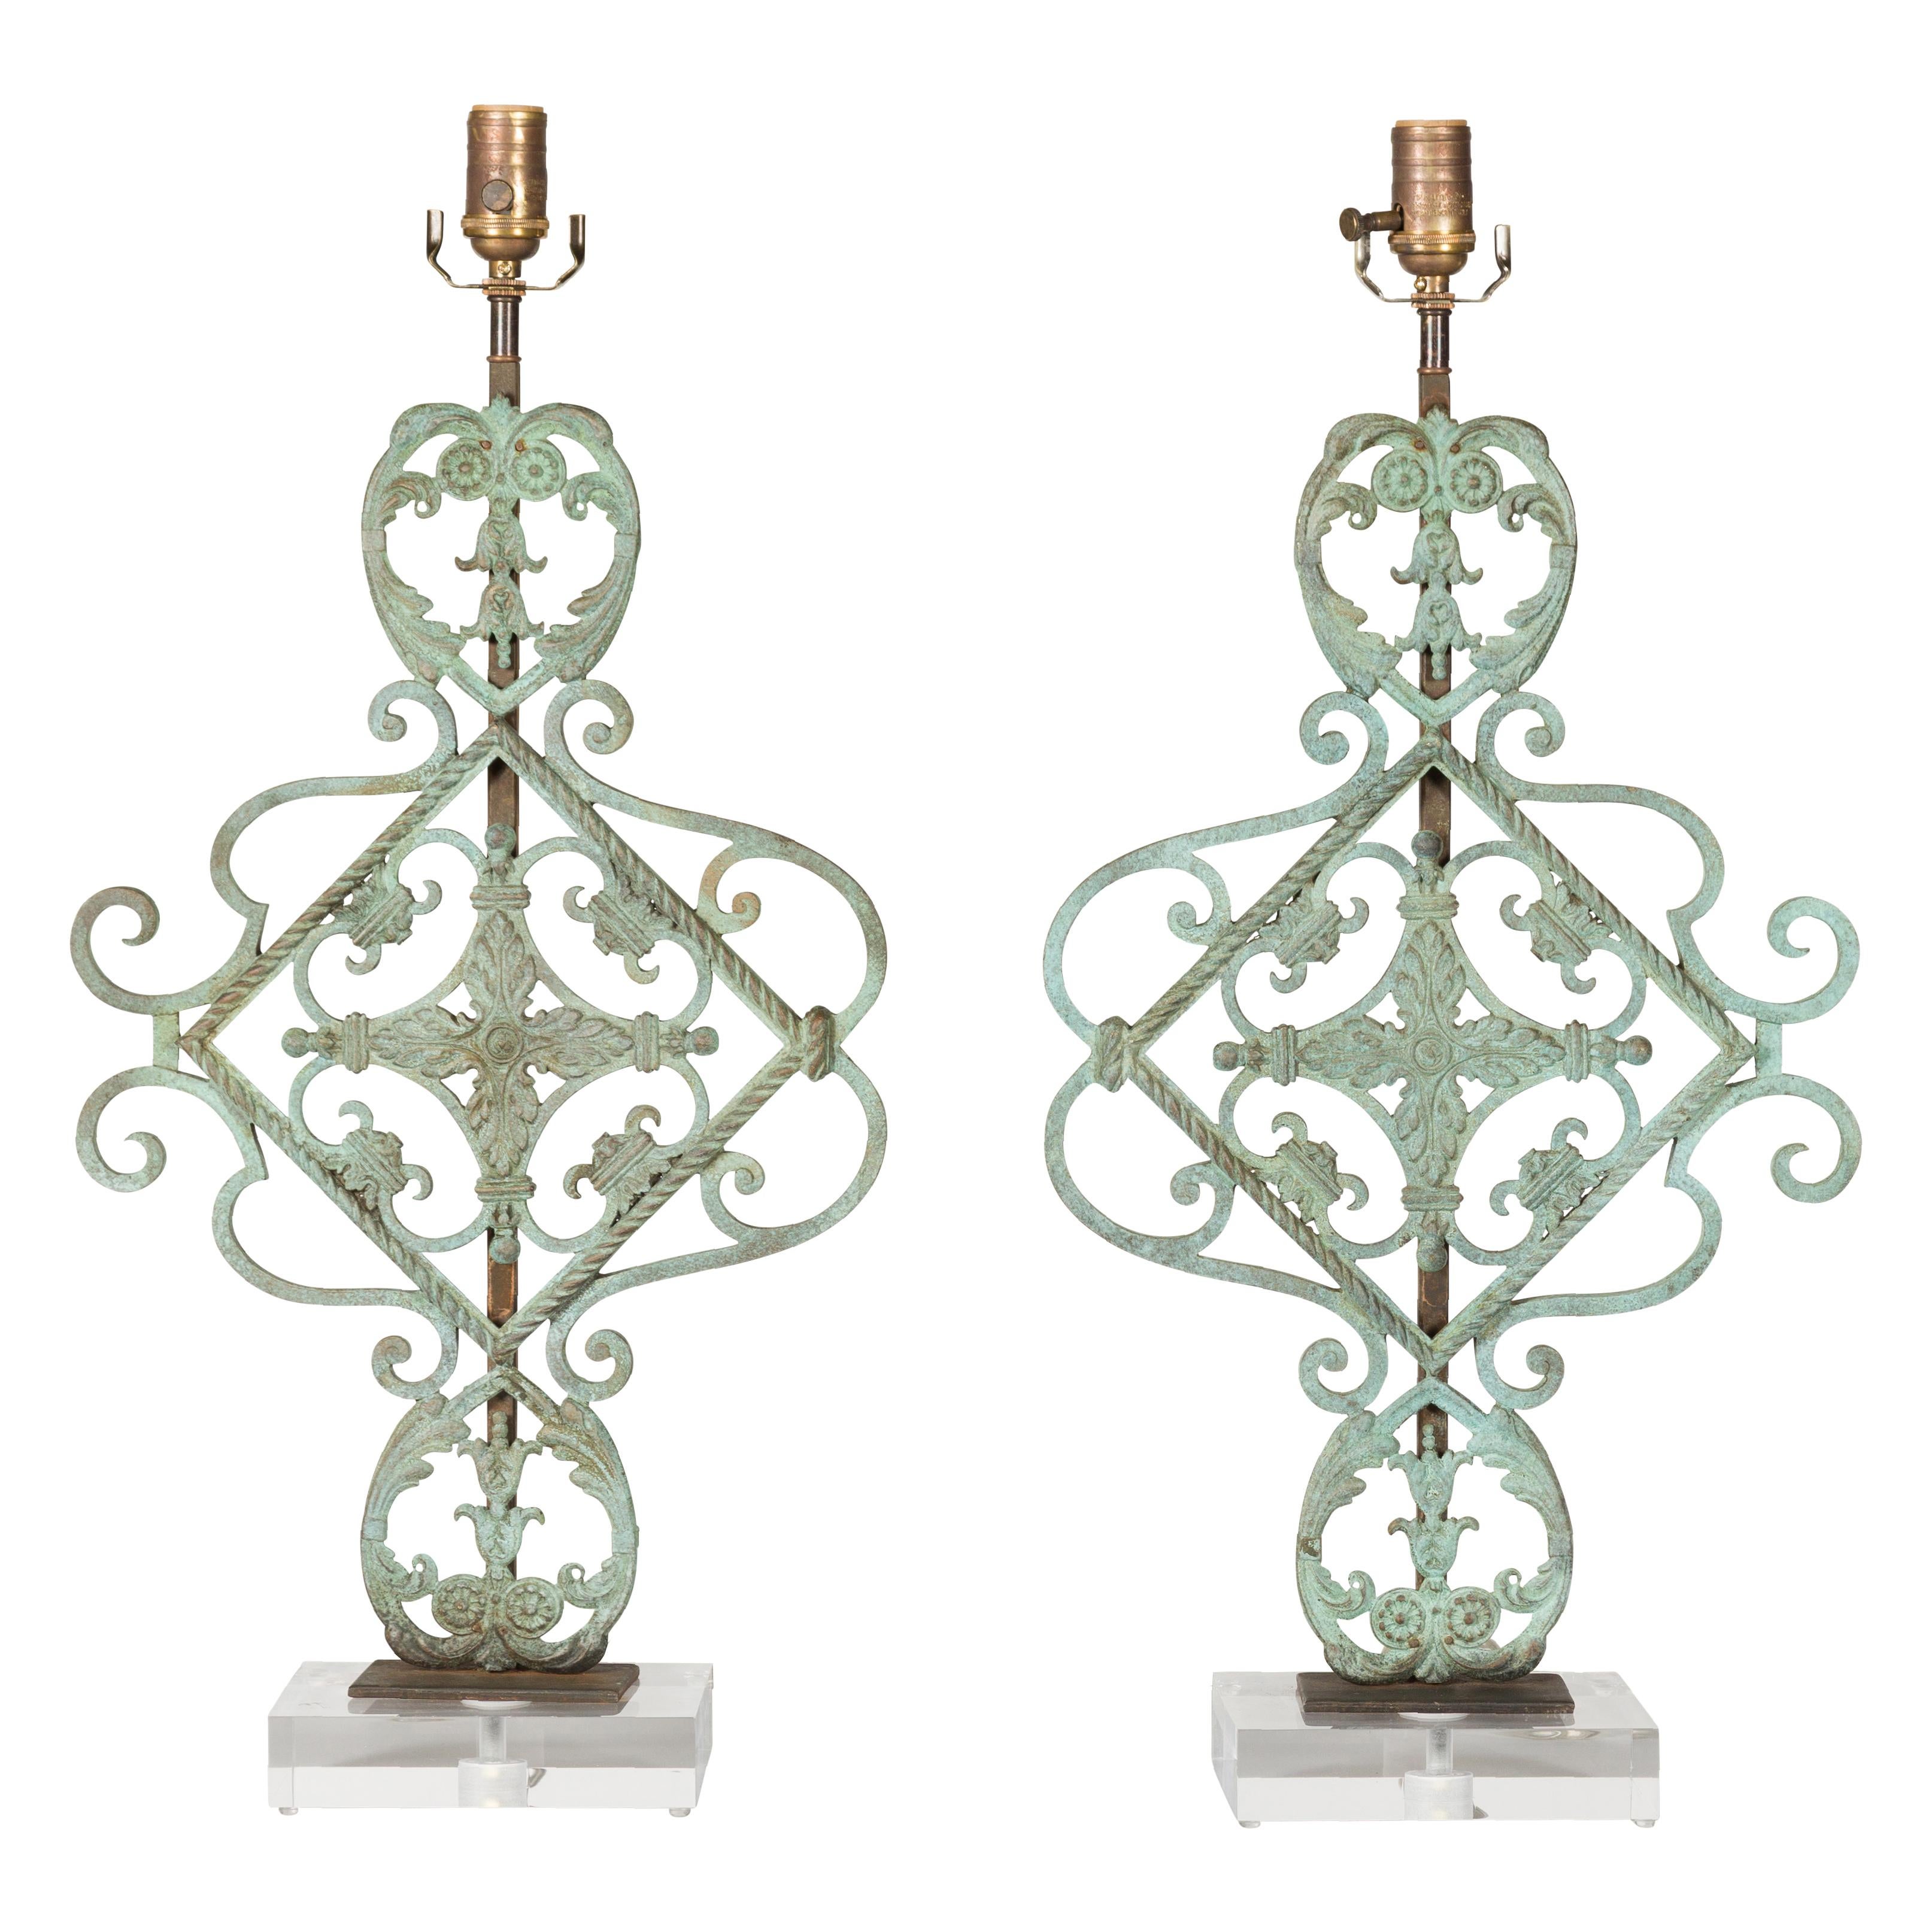 Italian Bronze Midcentury Table Lamps with Scrolling Motifs, on Lucite Bases For Sale 13